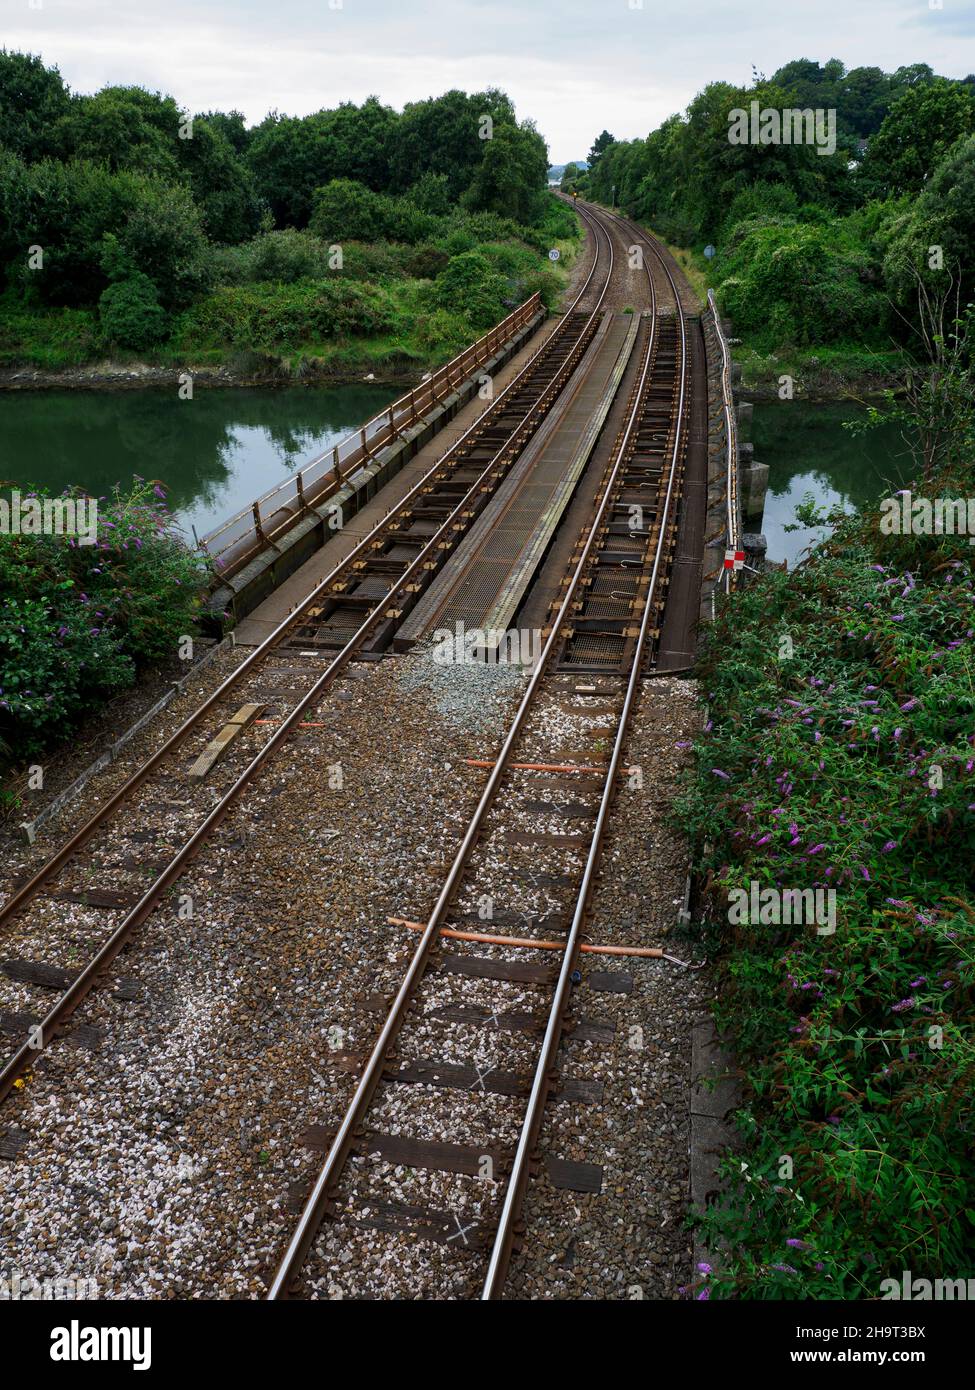 Railway track going over a river, Plymouth, Devon, UK Stock Photo